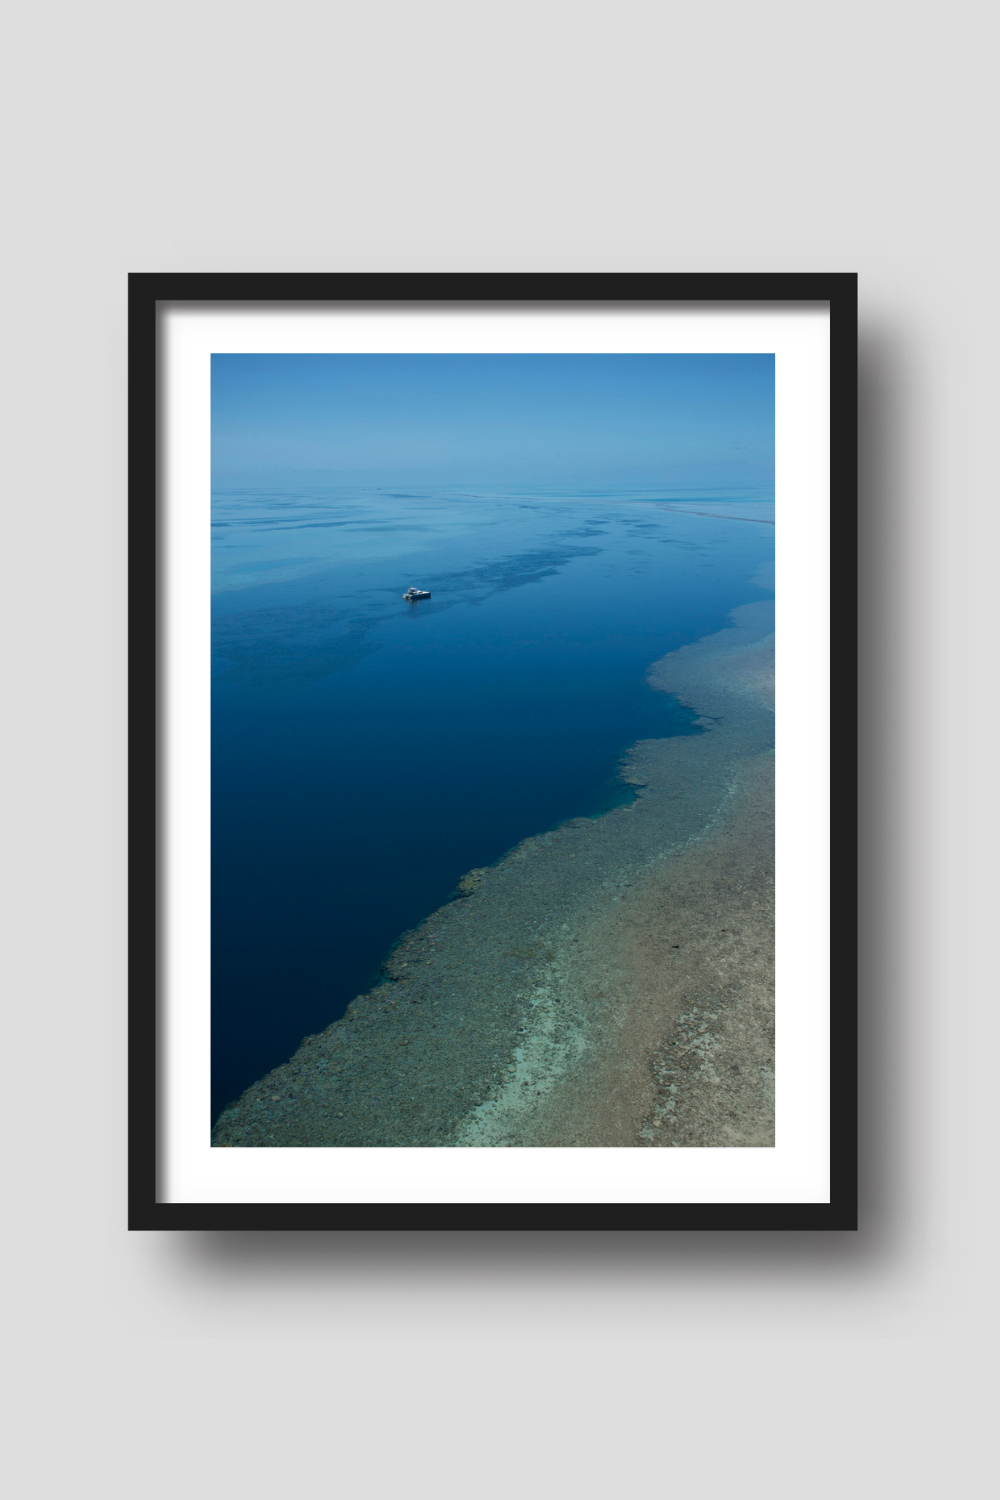 open blue ocean with a brown reef in the foreground a vessel on anchor amongst calm blue waters beyond